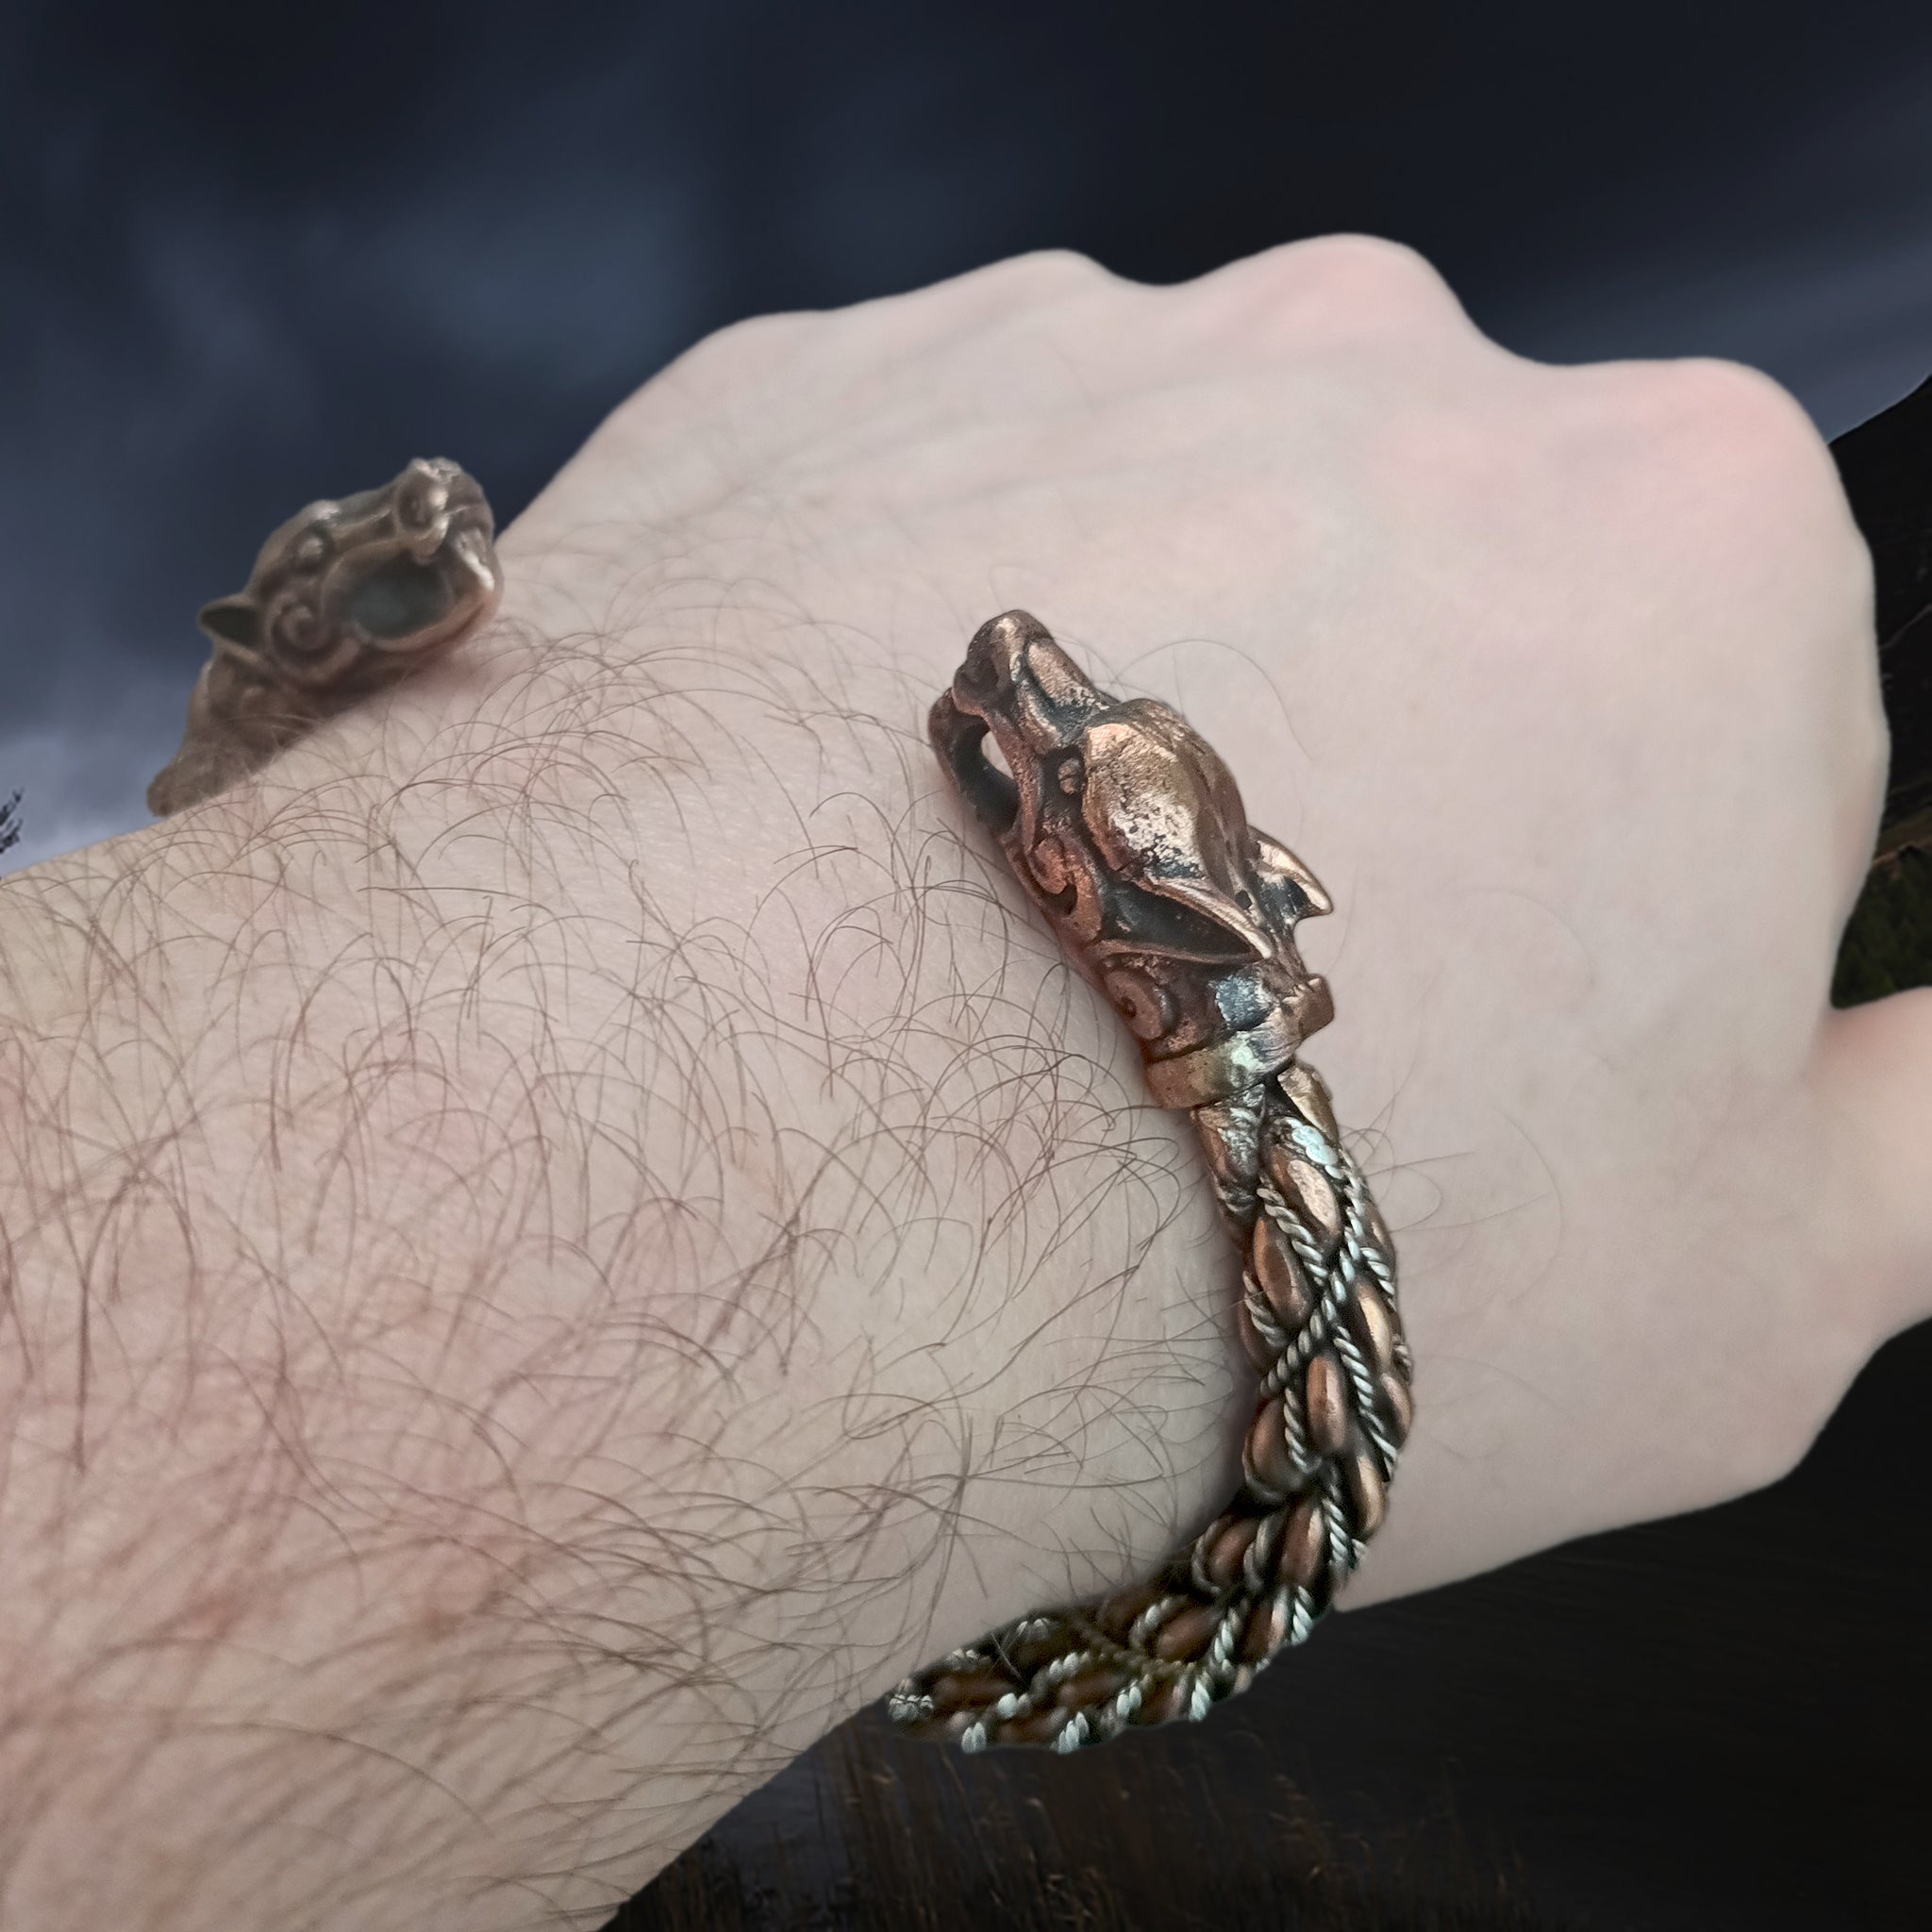 Handmade Twisted Bronze and Silver Arm Ring / Bracelet With Ferocious Wolf Heads on Wrist